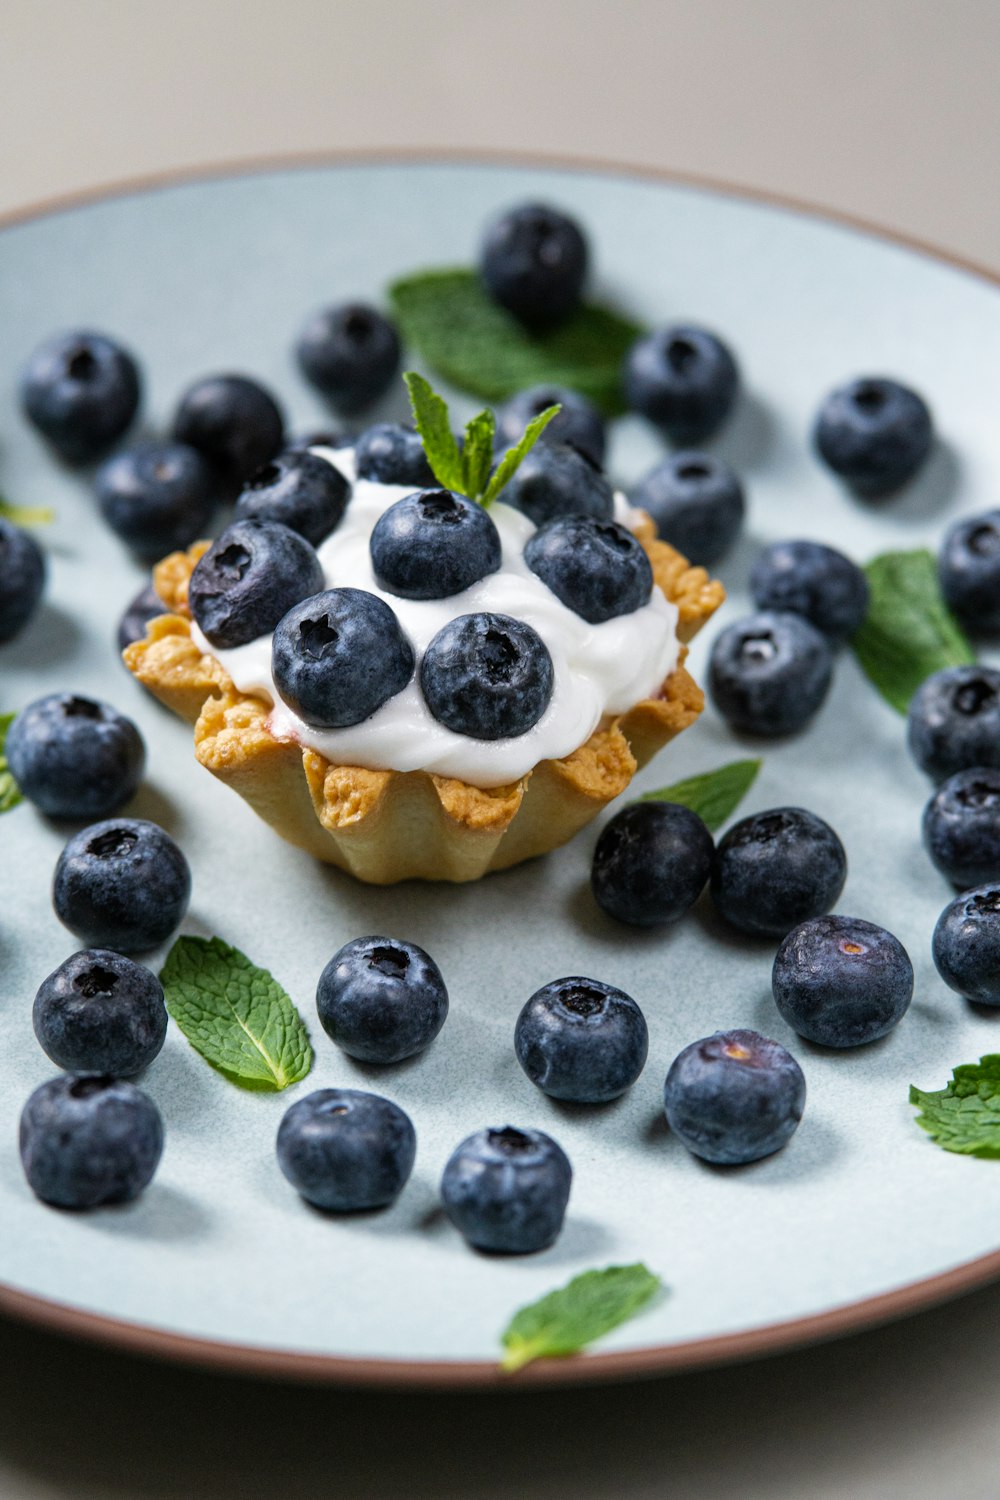 a blueberry tart on a plate with mint leaves